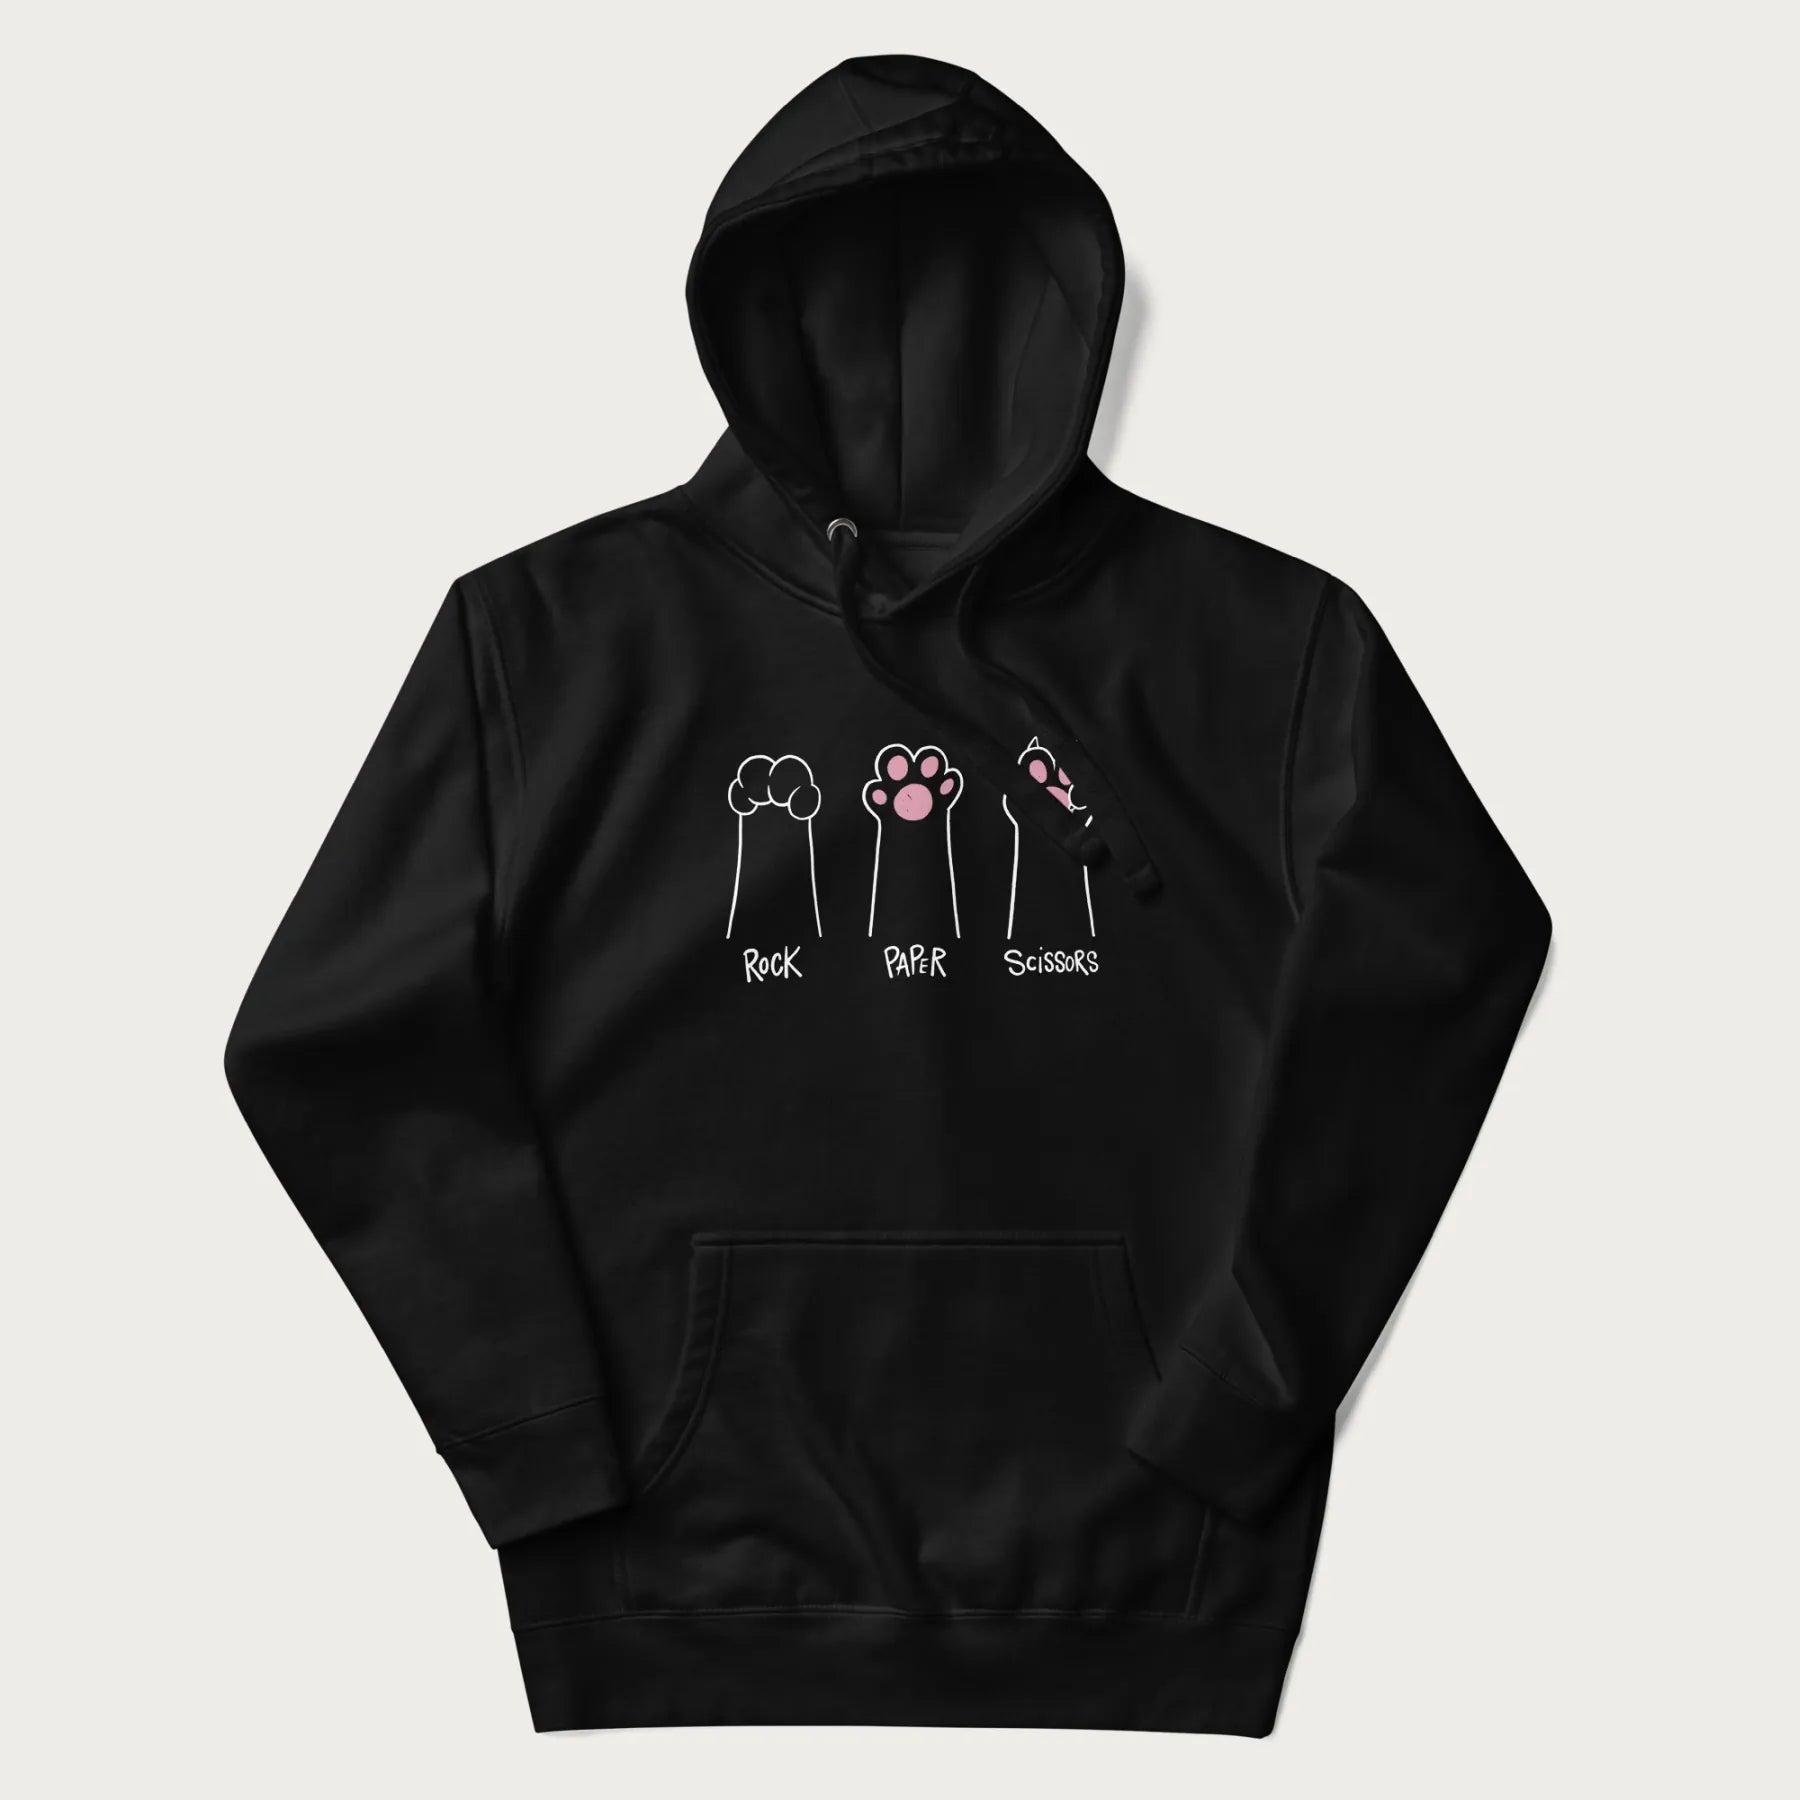 Black hoodie with graphic of cat paws playing rock-paper-scissors.